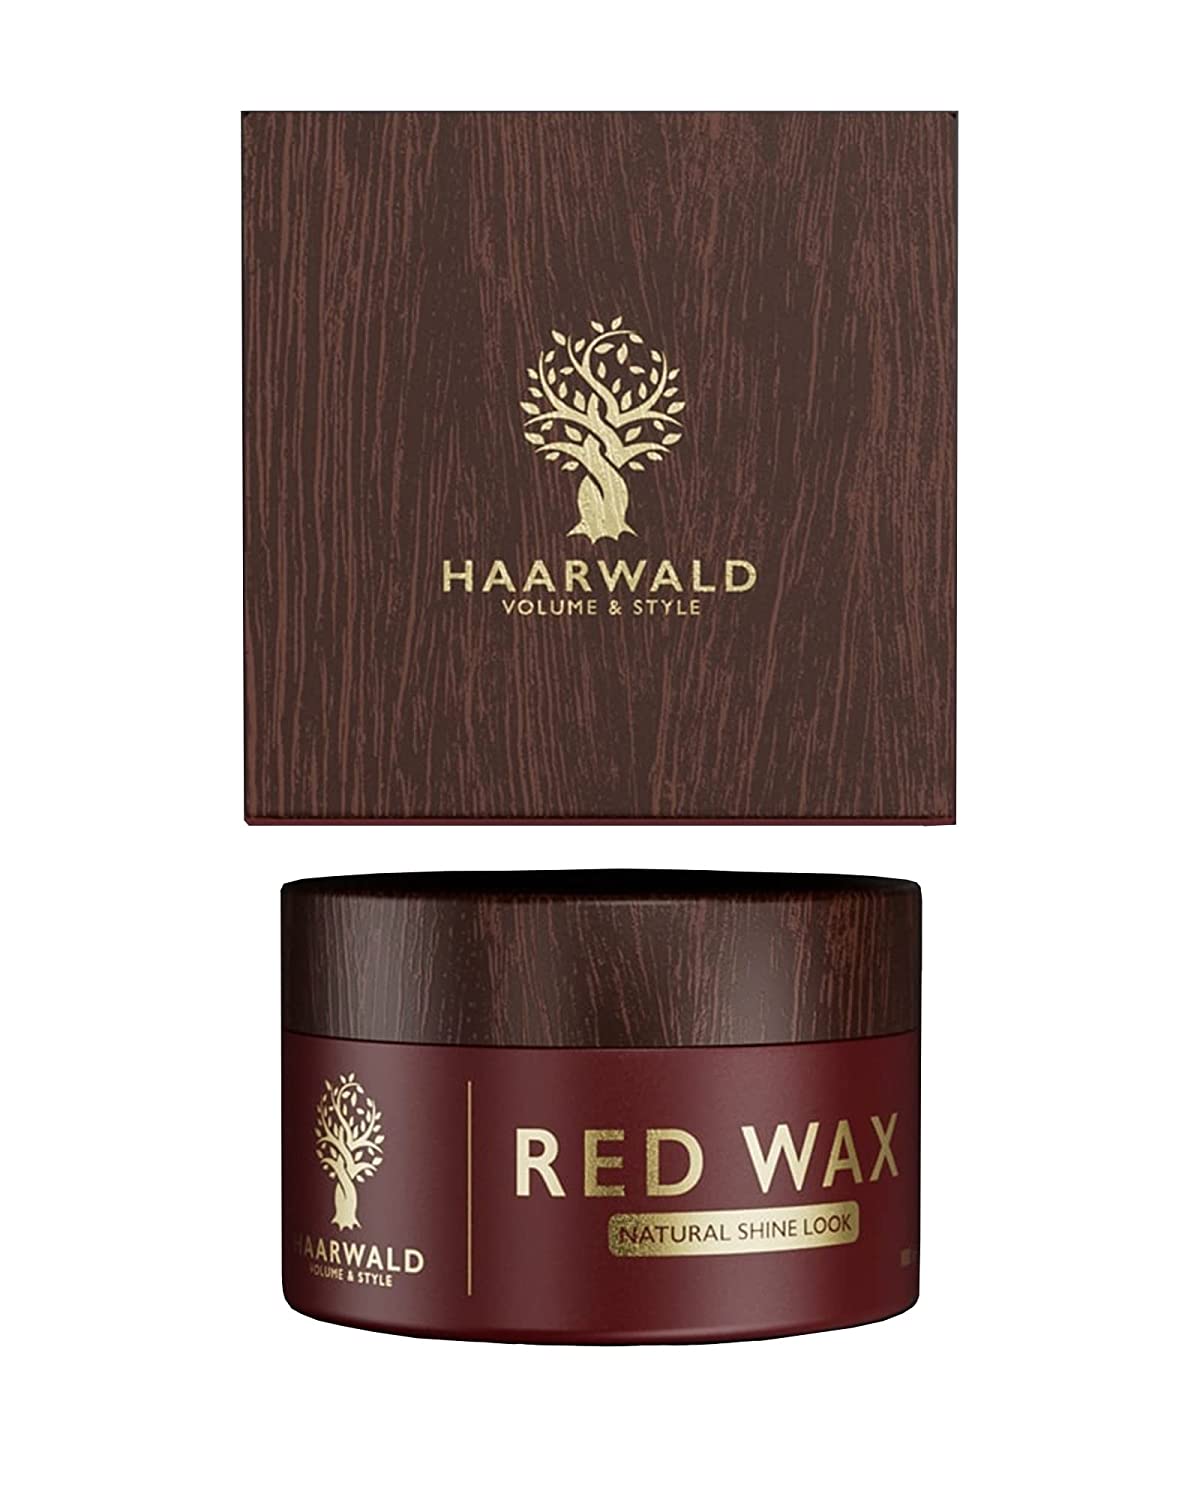 haarwald HAARWALD® Premium Hair Wax for Men and Women [Maximum Hold] - Styling Wax for Any Style - Hair Wax for 24 Hours Hold without Gluing - Hair Wax Matte Hair Paste (Red Wax)